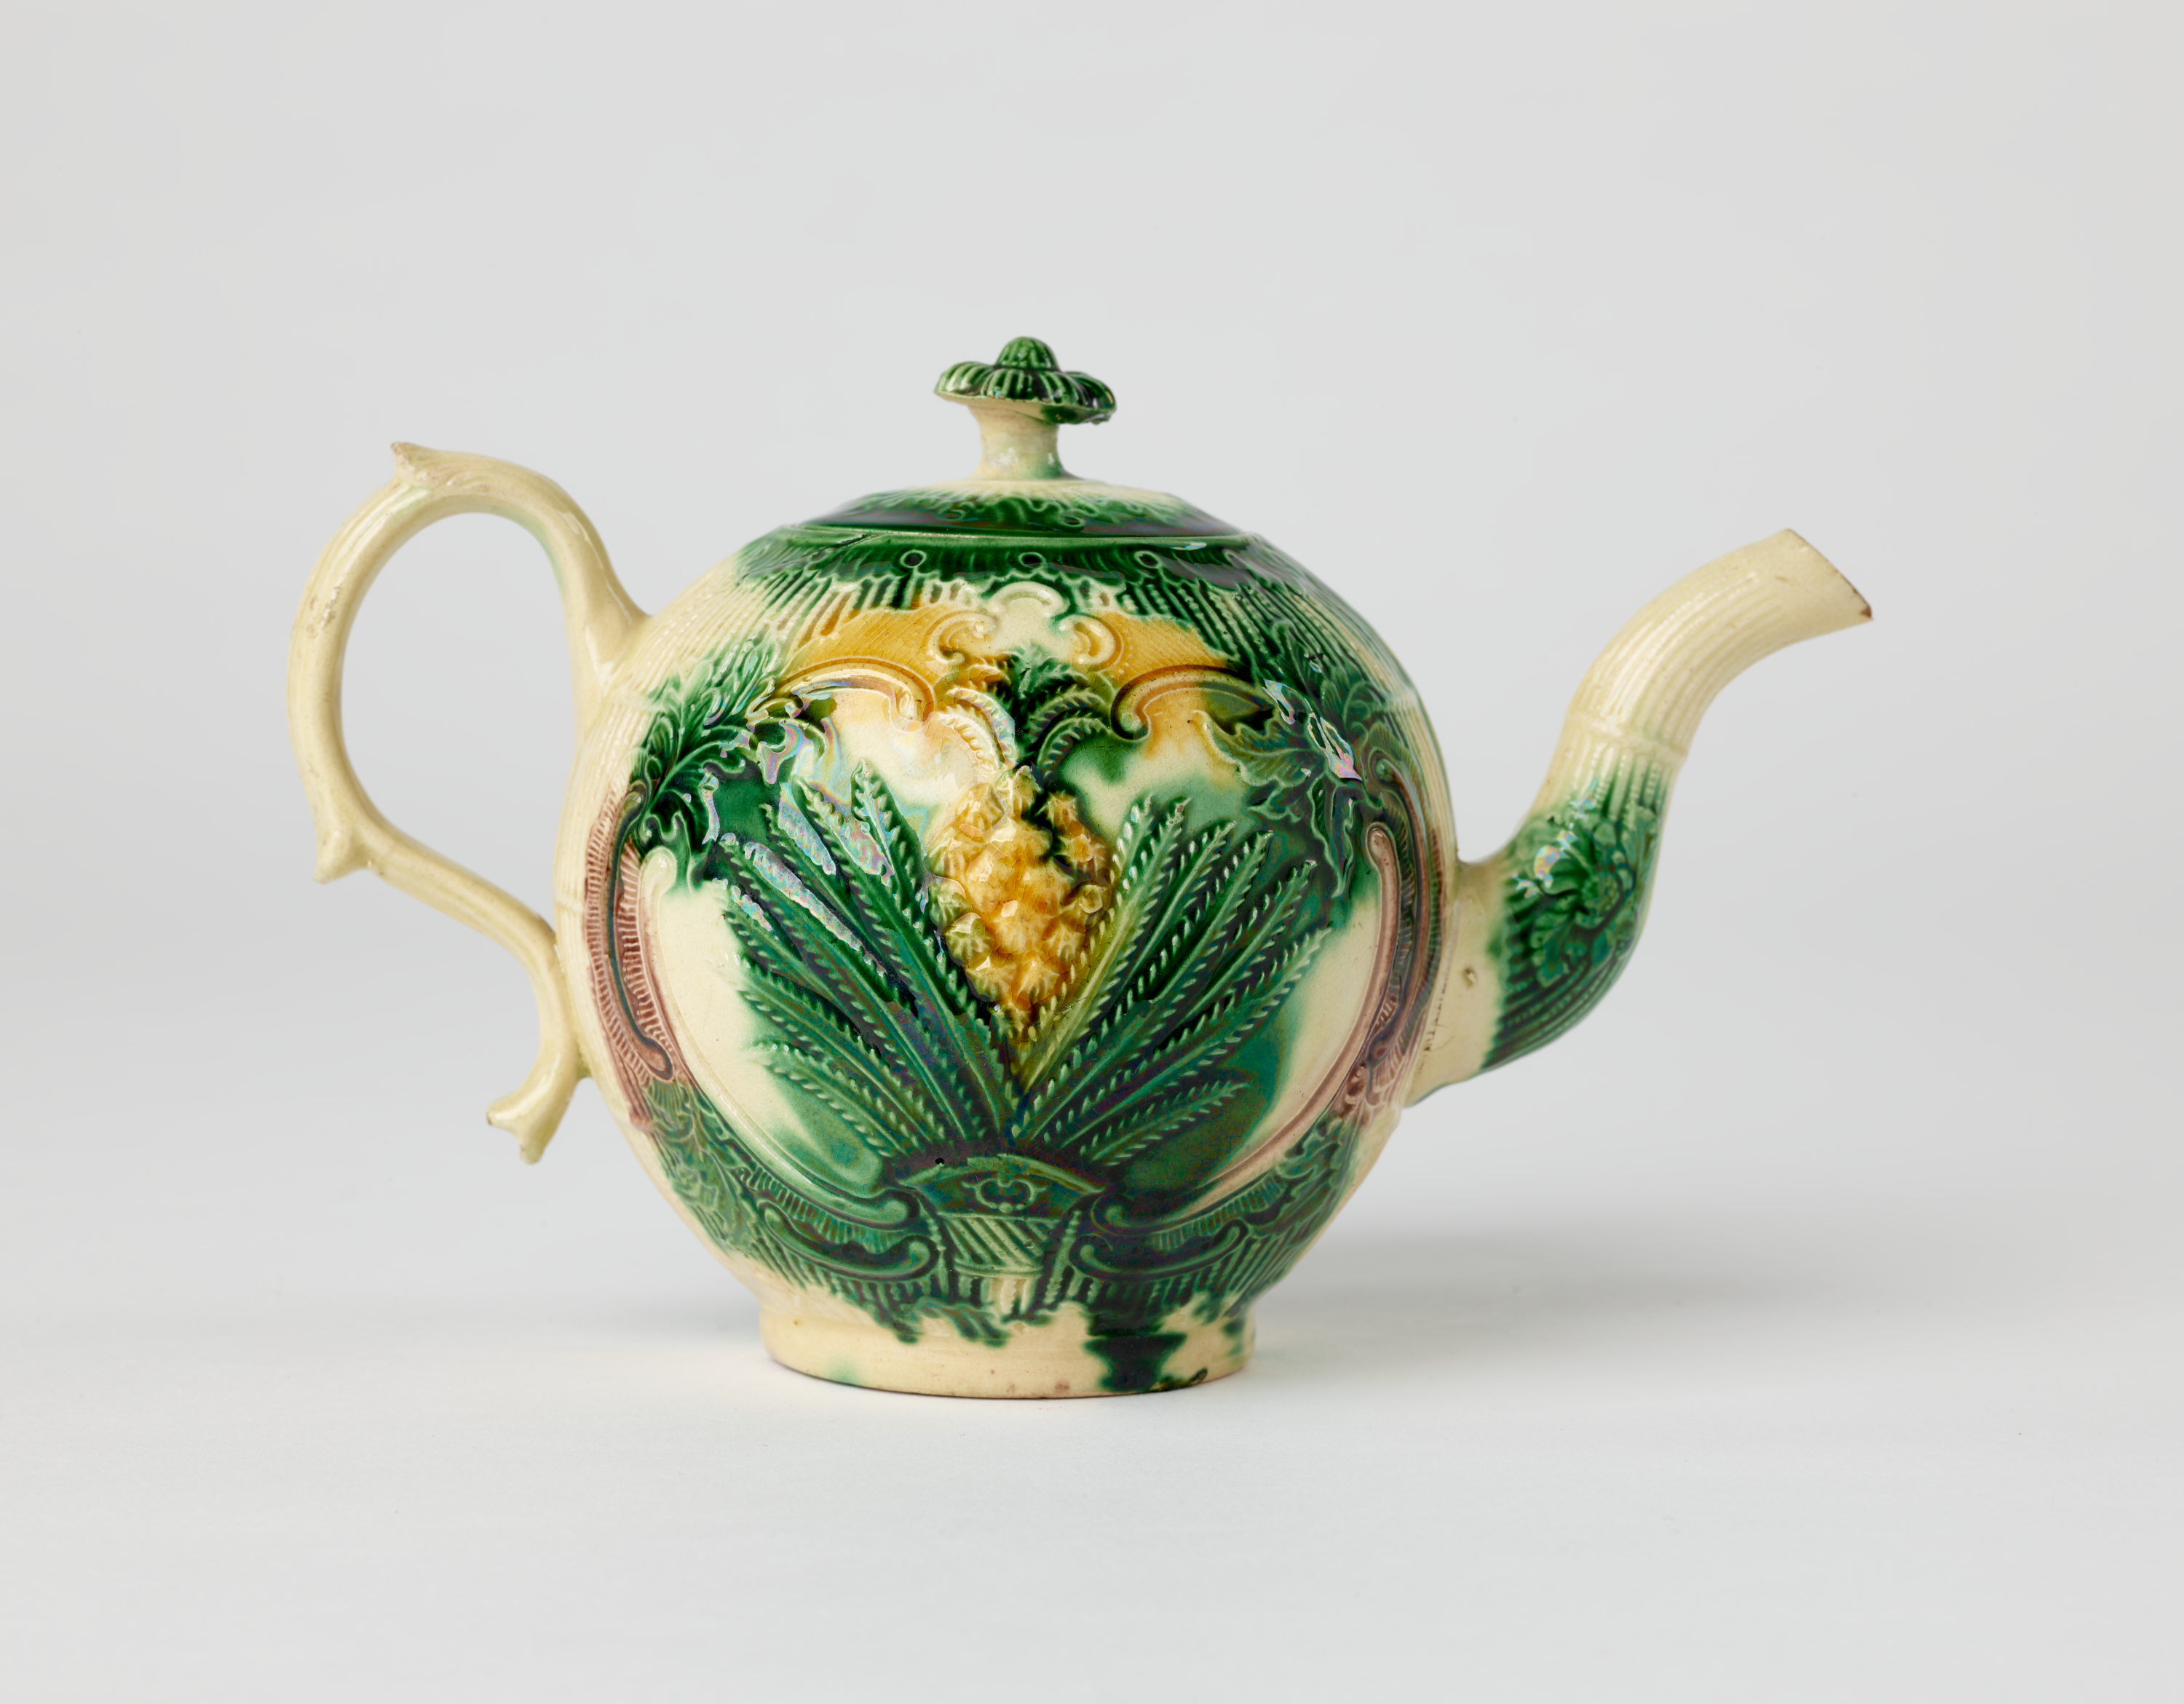 /A%20bulbous%20ceramic%20teapot%20with%20a%20long%20curved%20spout%20and%20handle%2C%20white%2C%20dark%20green.%20and%20yellow%20glaze%2C%20and%20floral%20decorations%20ranging%20from%20leaves%20to%20a%20more%20central%20pineapple.